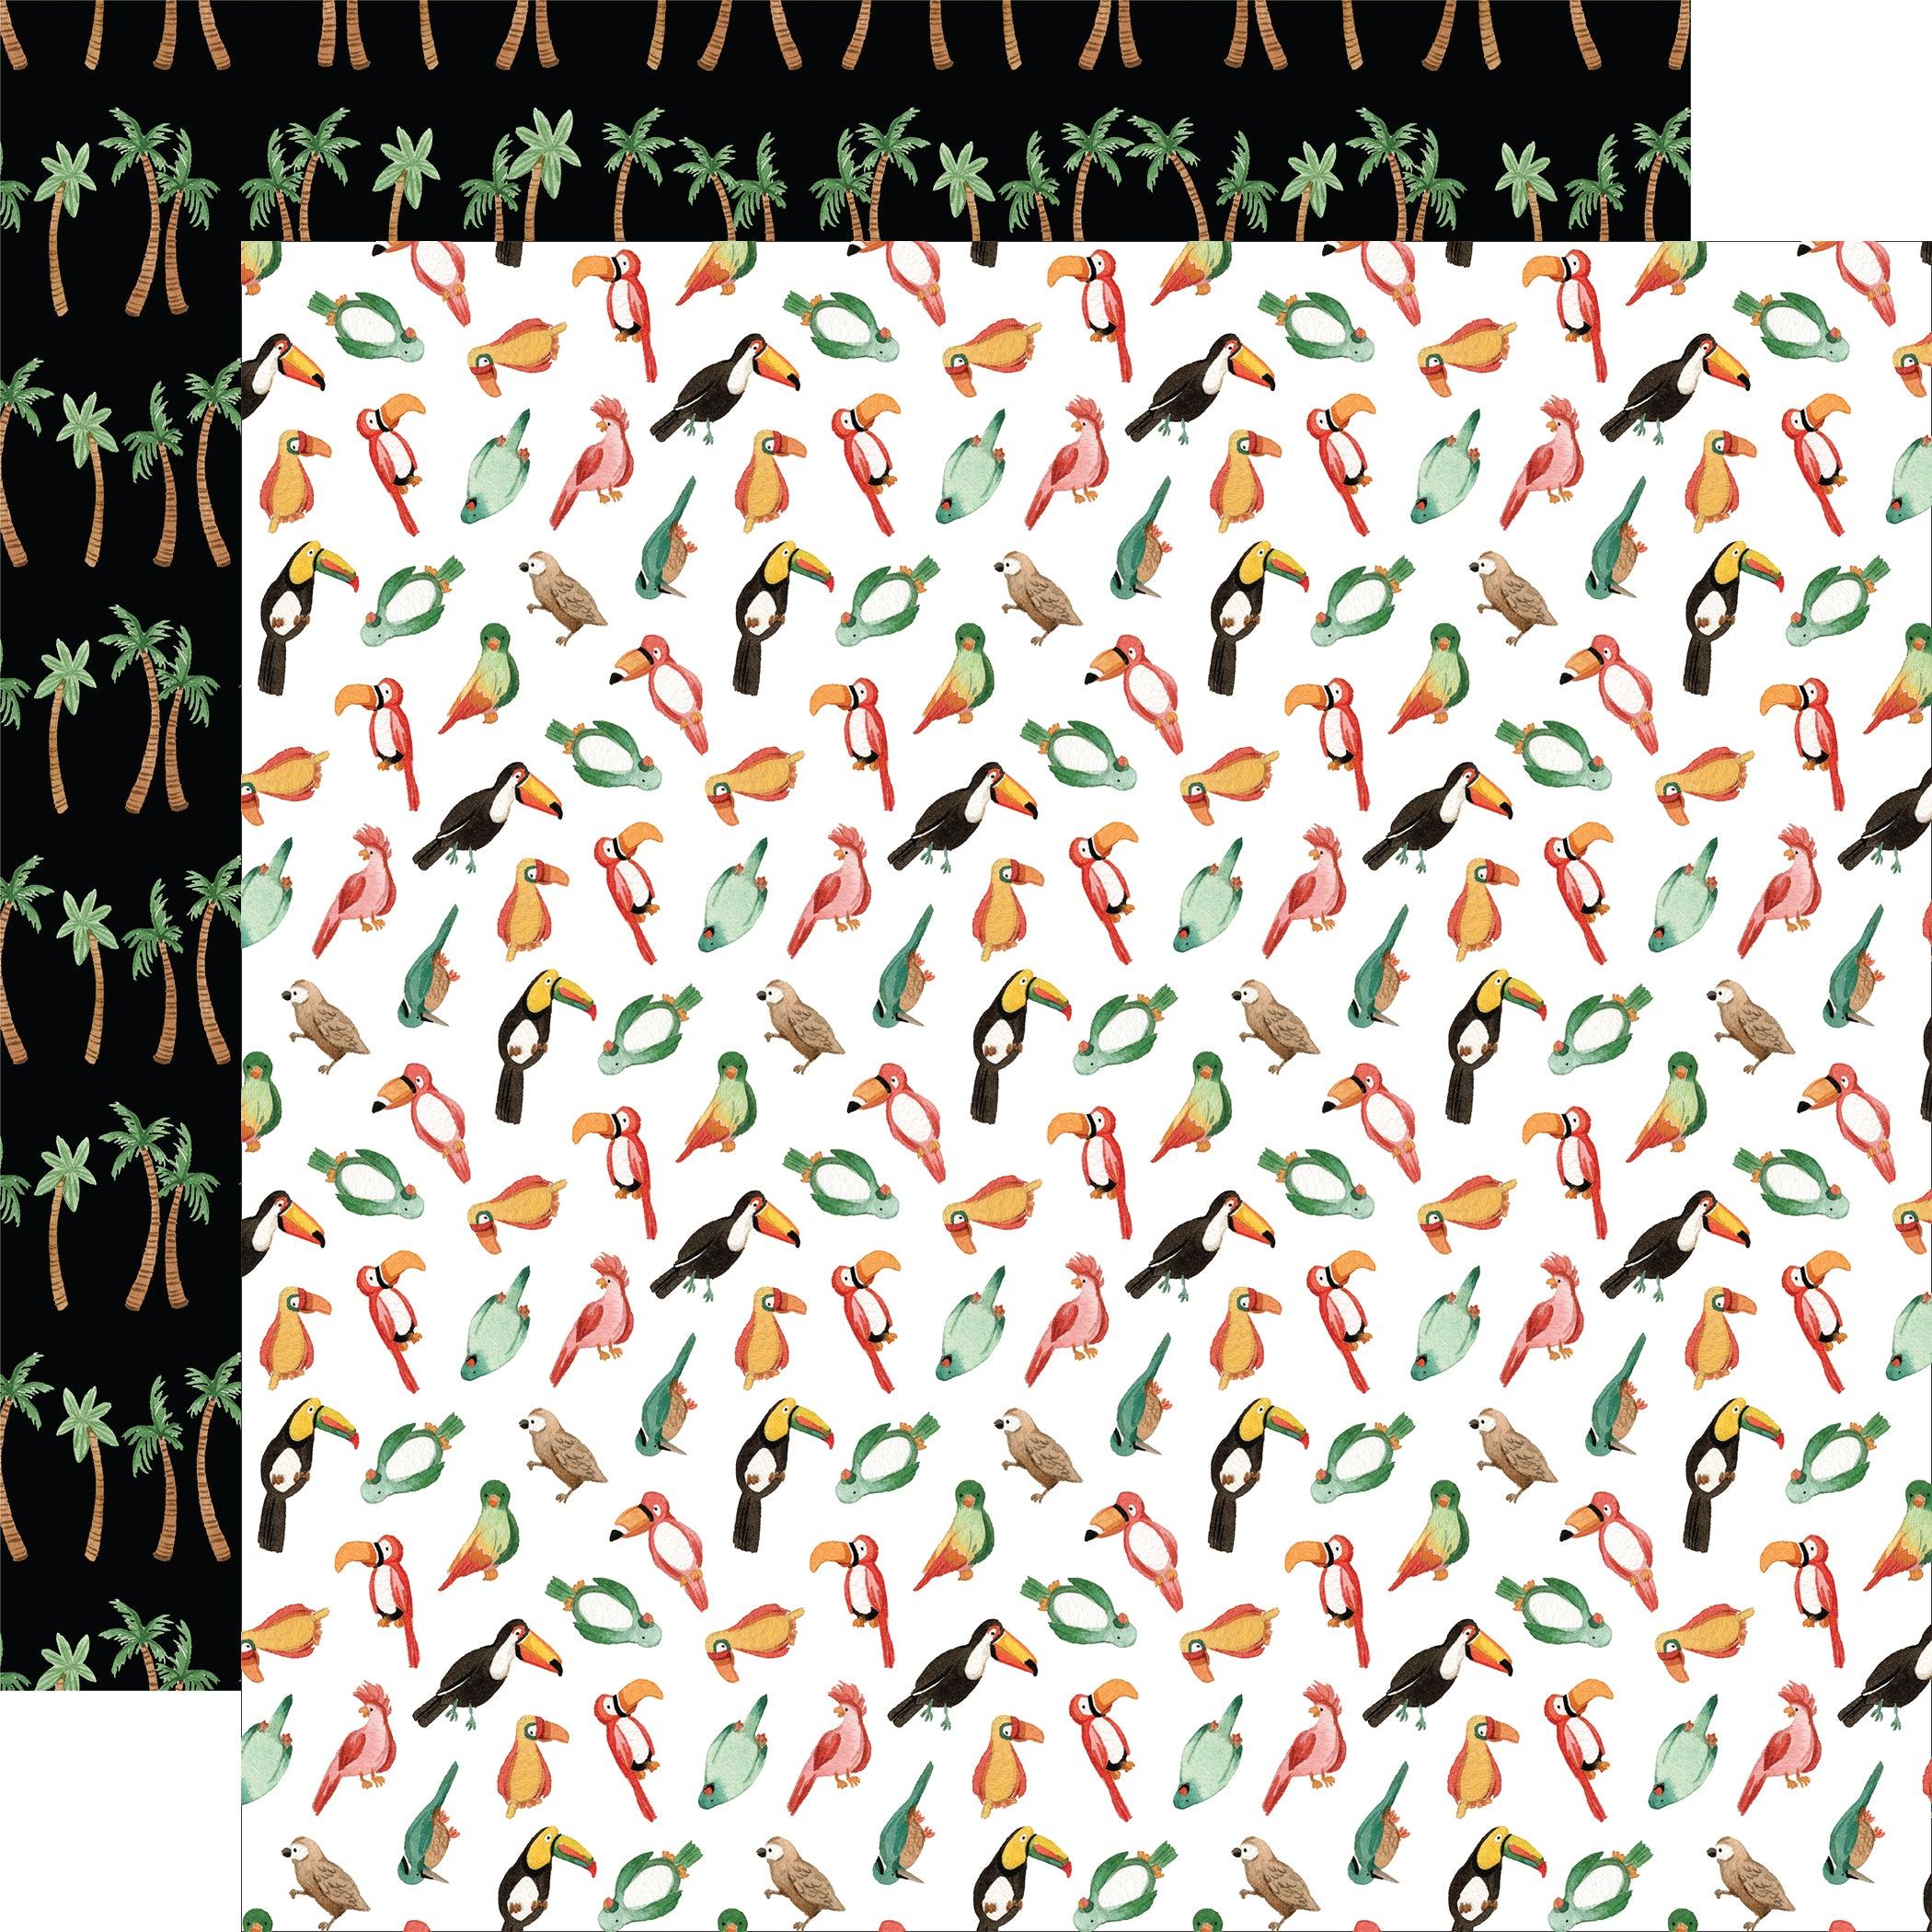 Animal Kingdom Collection Birds Of A Feather 12 x 12 Double-Sided Scrapbook Paper by Echo Park Paper - Scrapbook Supply Companies